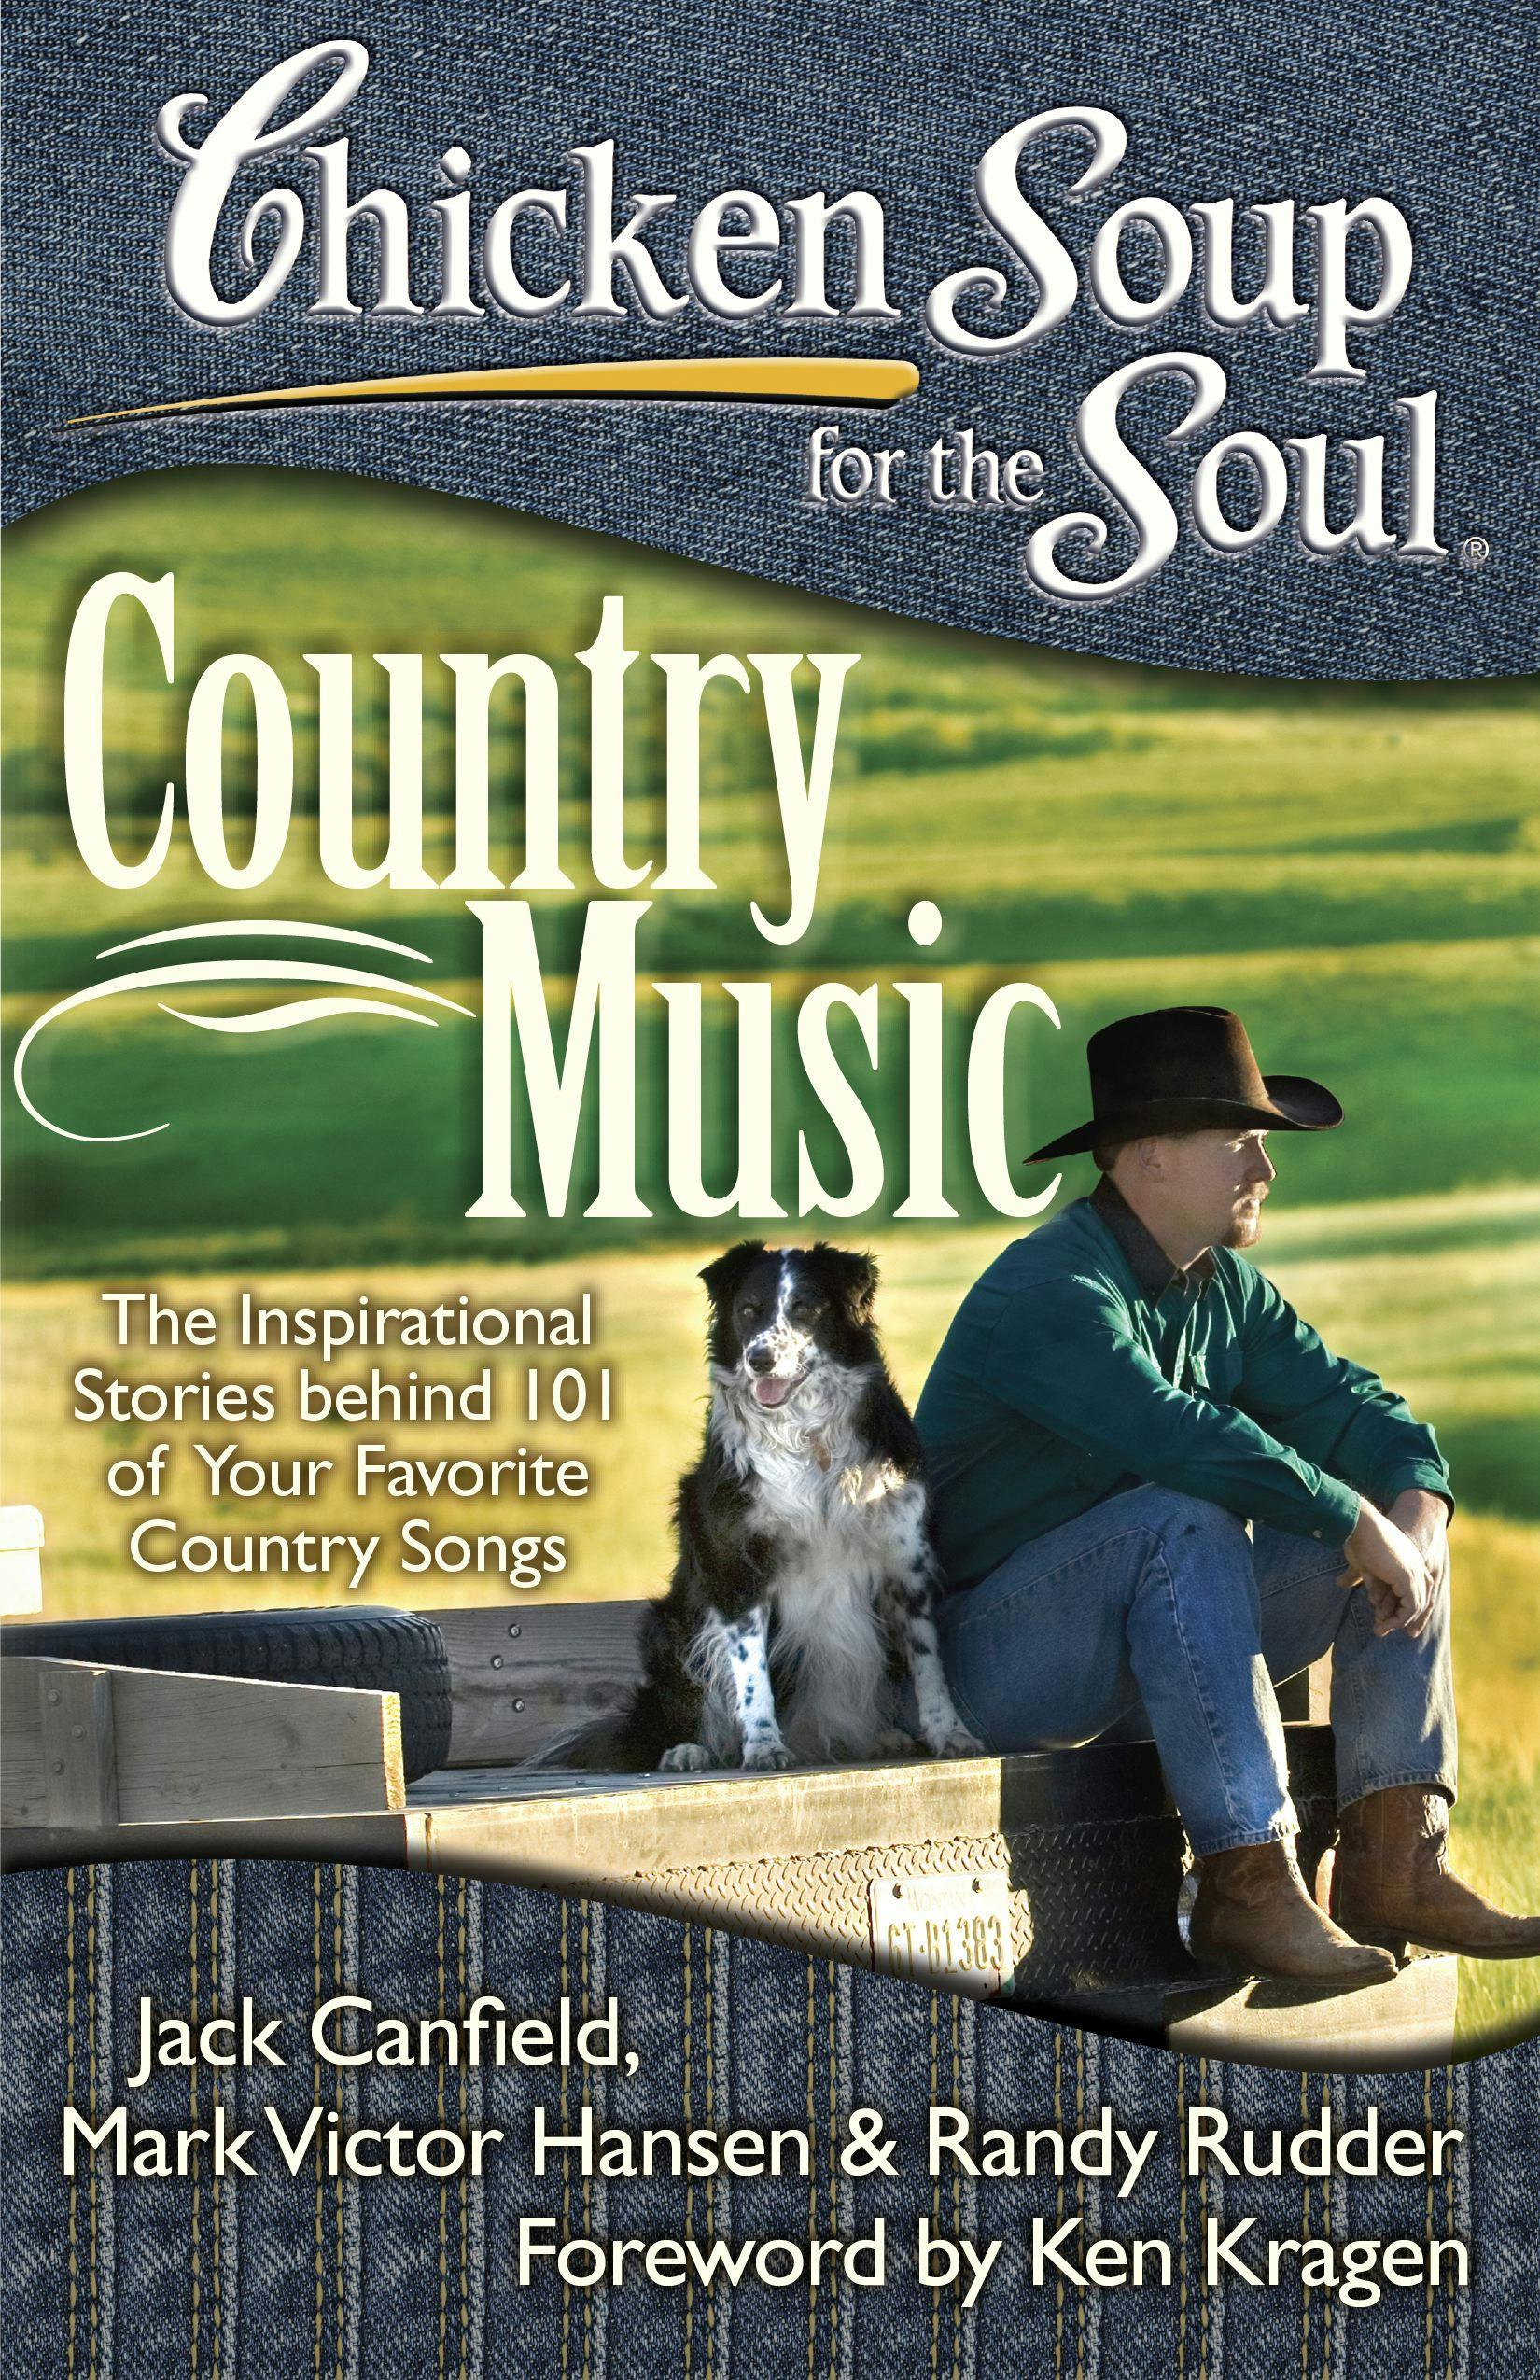 Chicken Soup for the Soul: Country Music: The Inspirational Stories behind 101 of Your Favorite Country Songs - Mark Victor Hansen, Jack Canfield, Randy Rudder